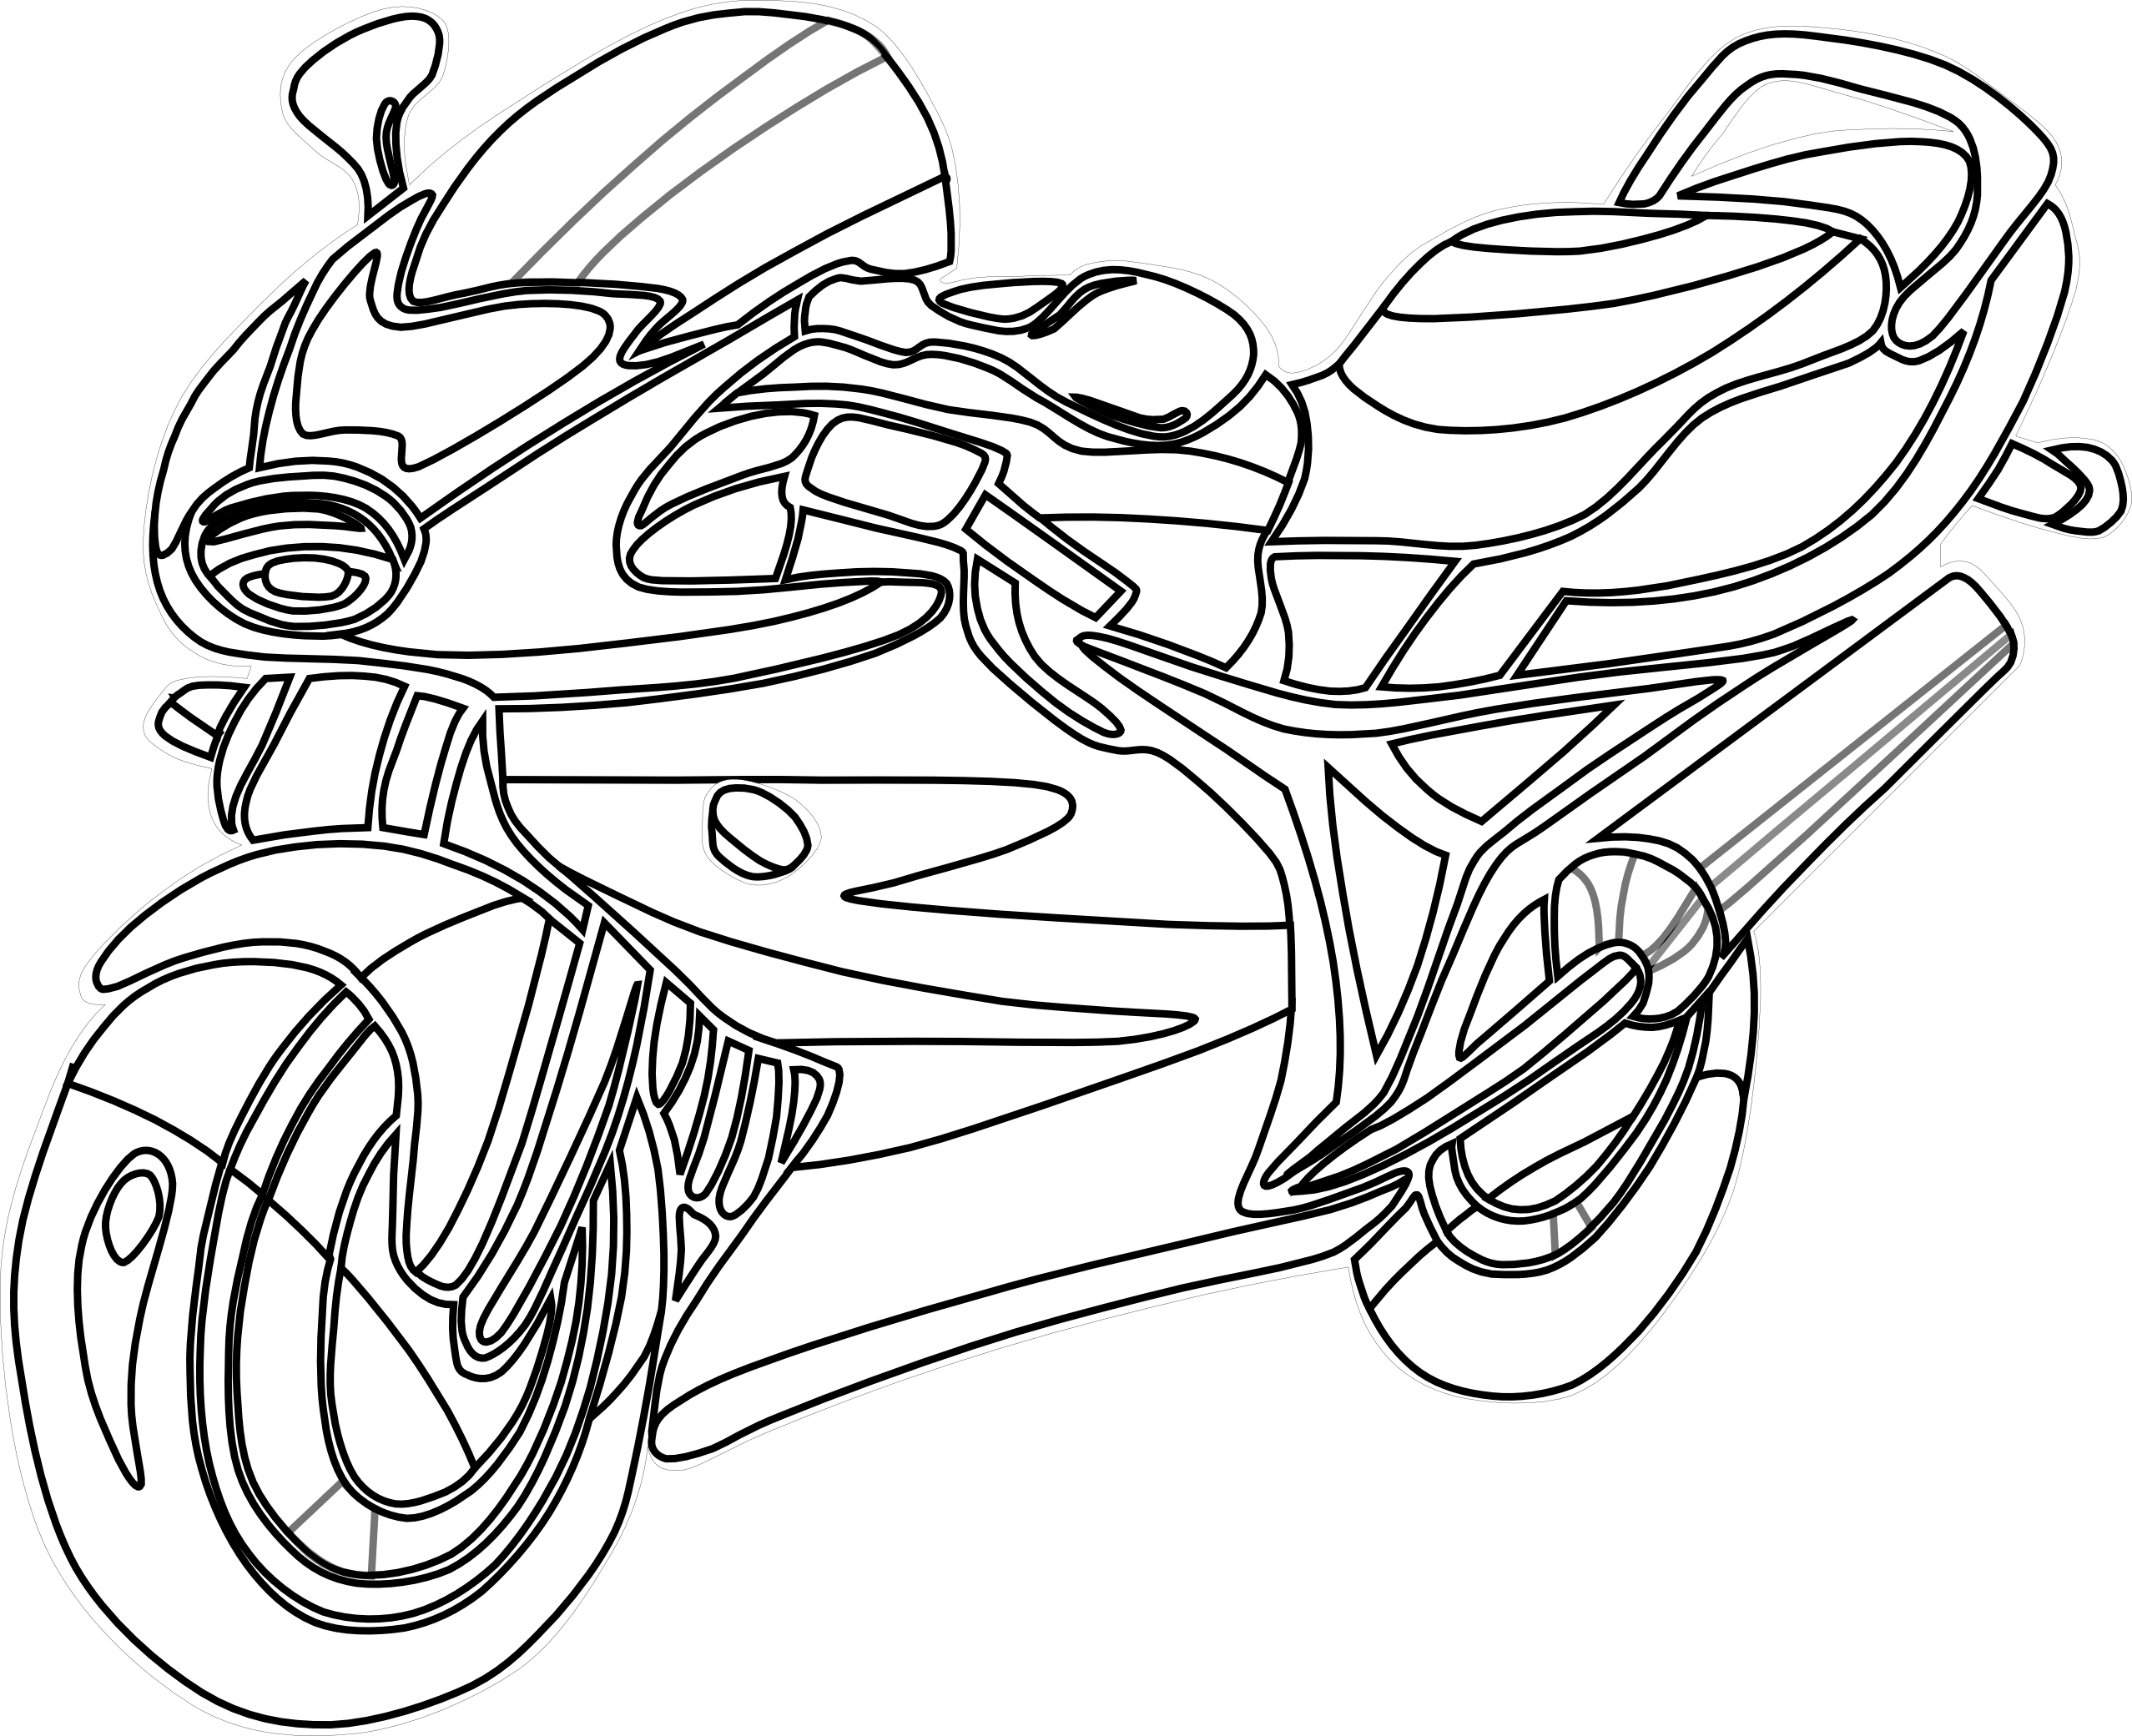 Motorcycle clipart black and white free clipart